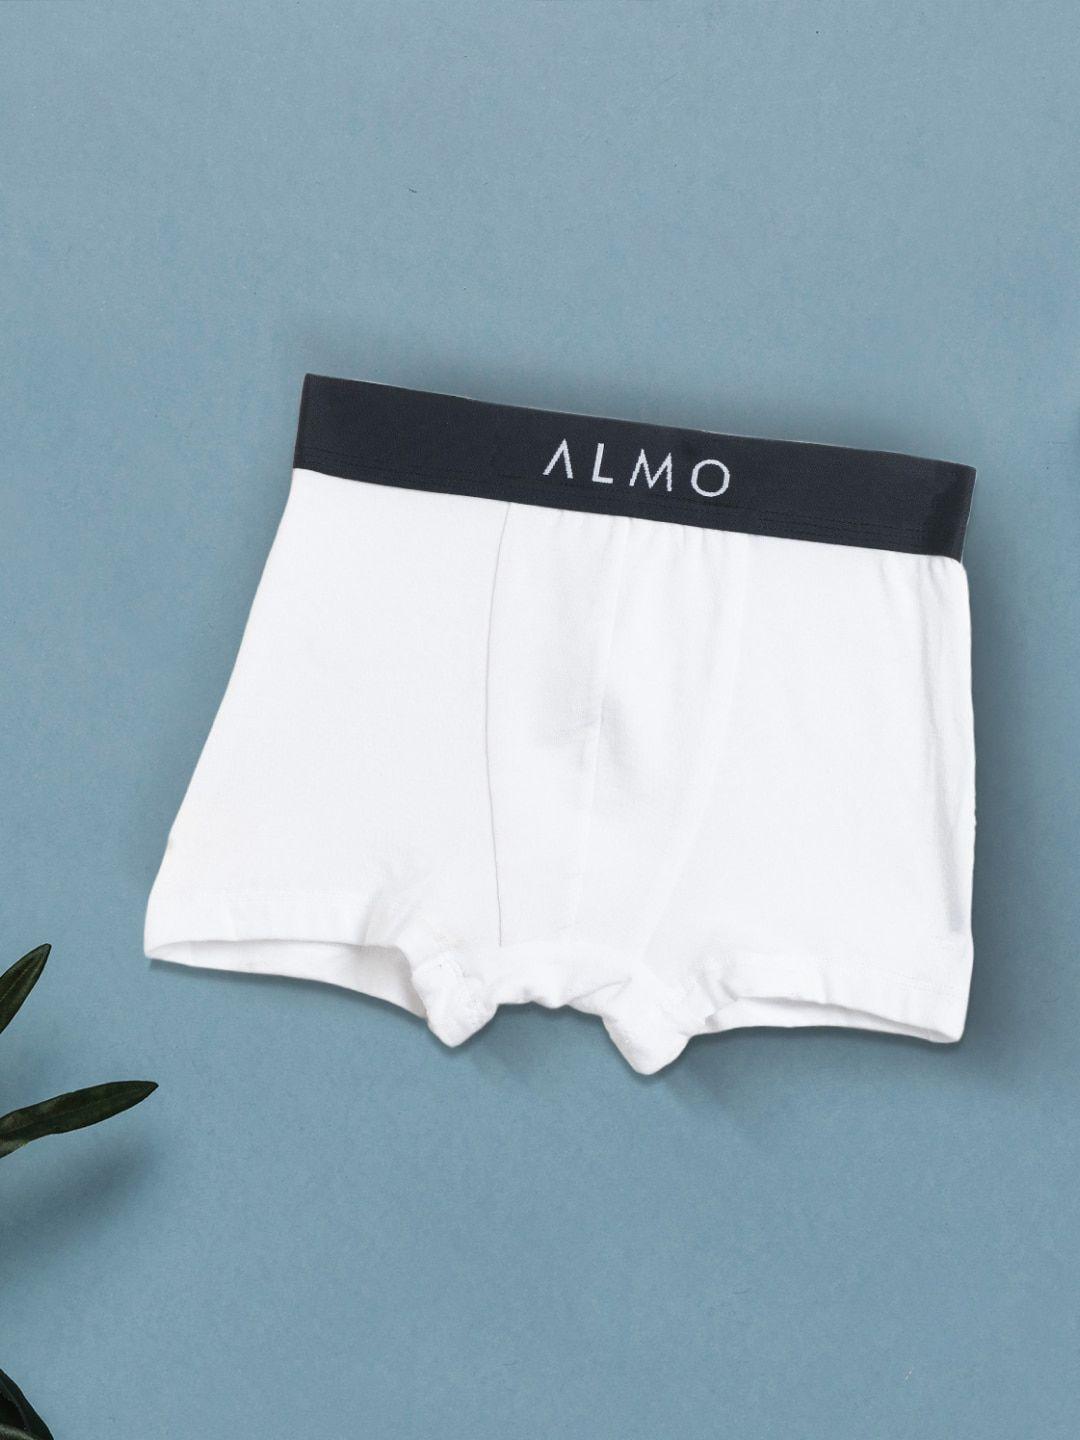 almo wear boys pack of 2 brand logo printed anti-bacterial trunks